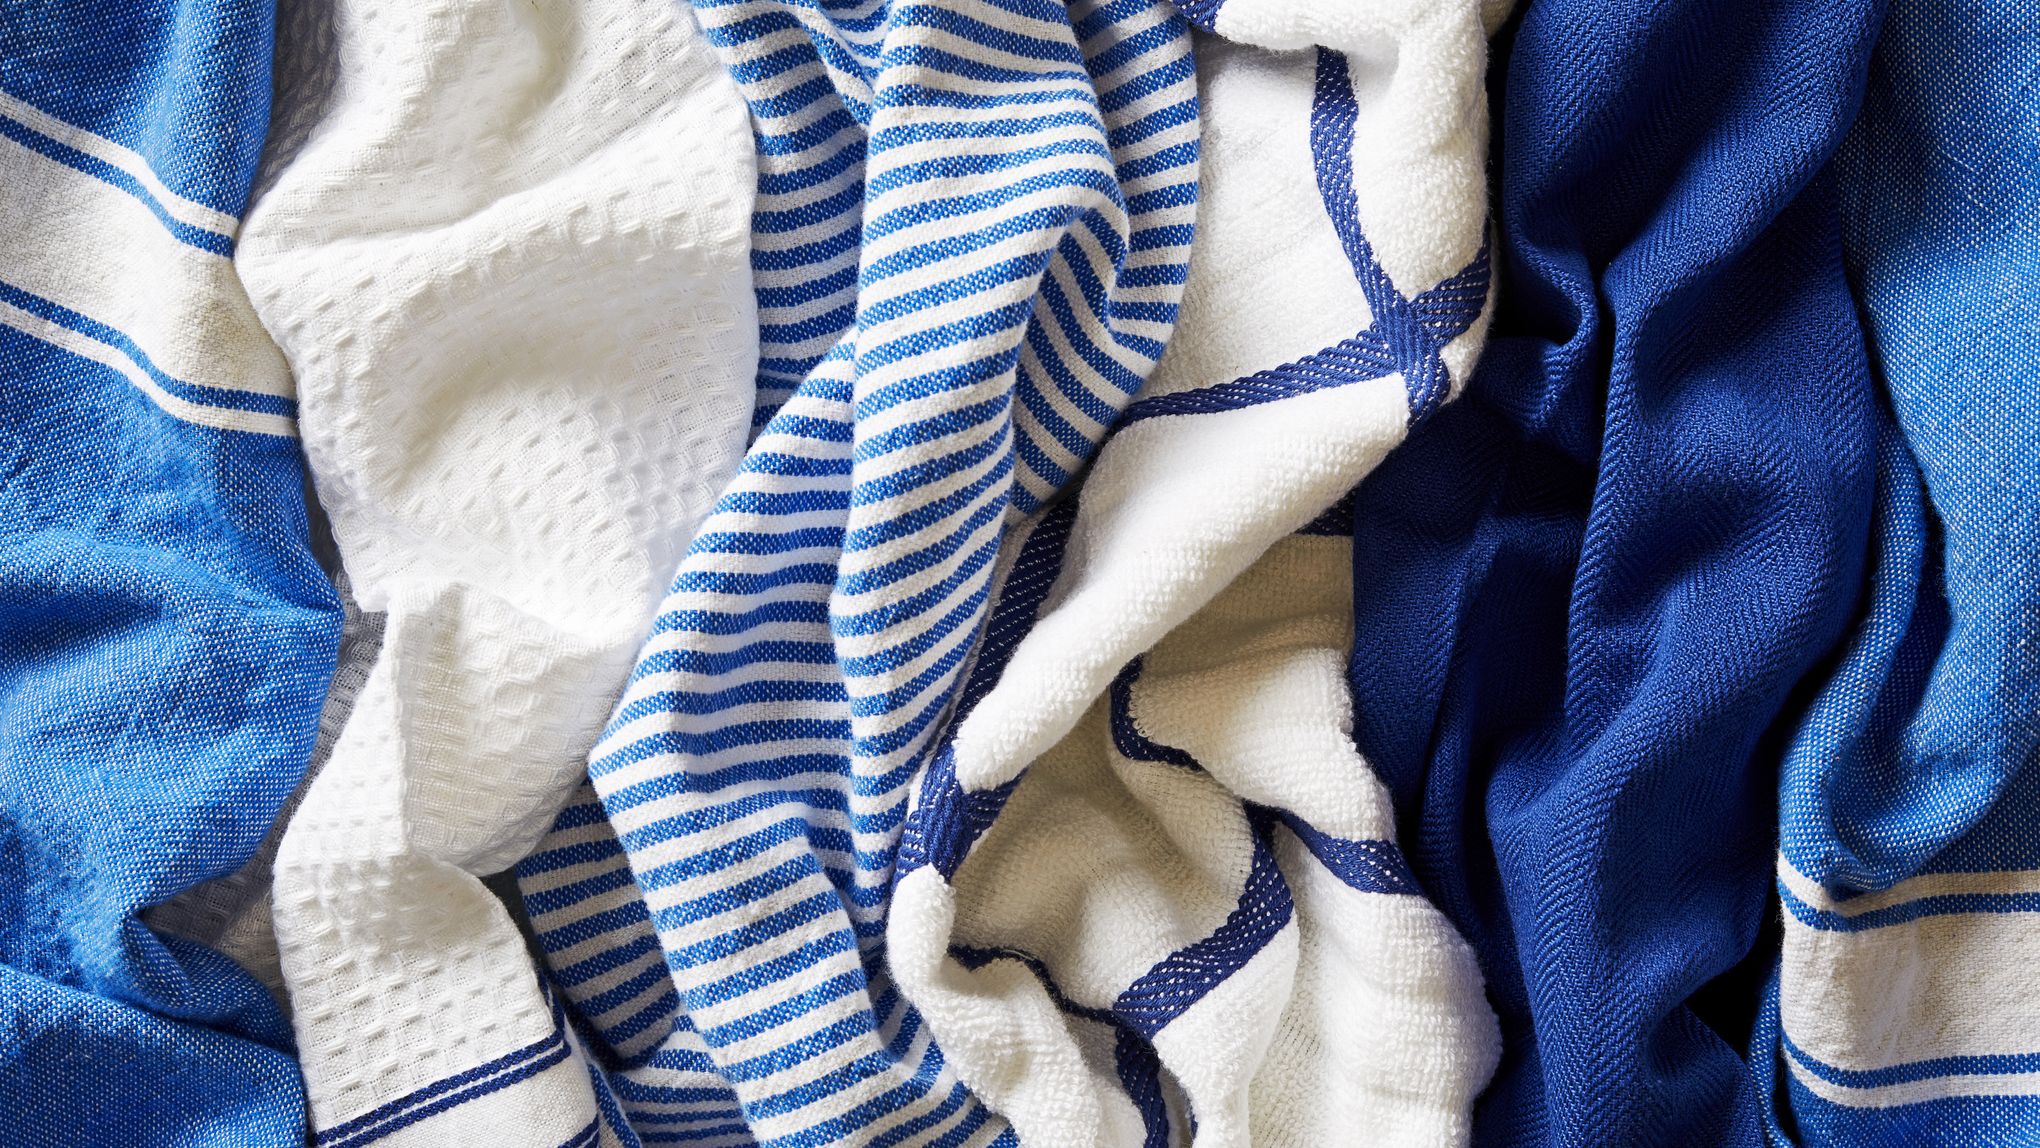 The best dish towels are rarely the most expensive